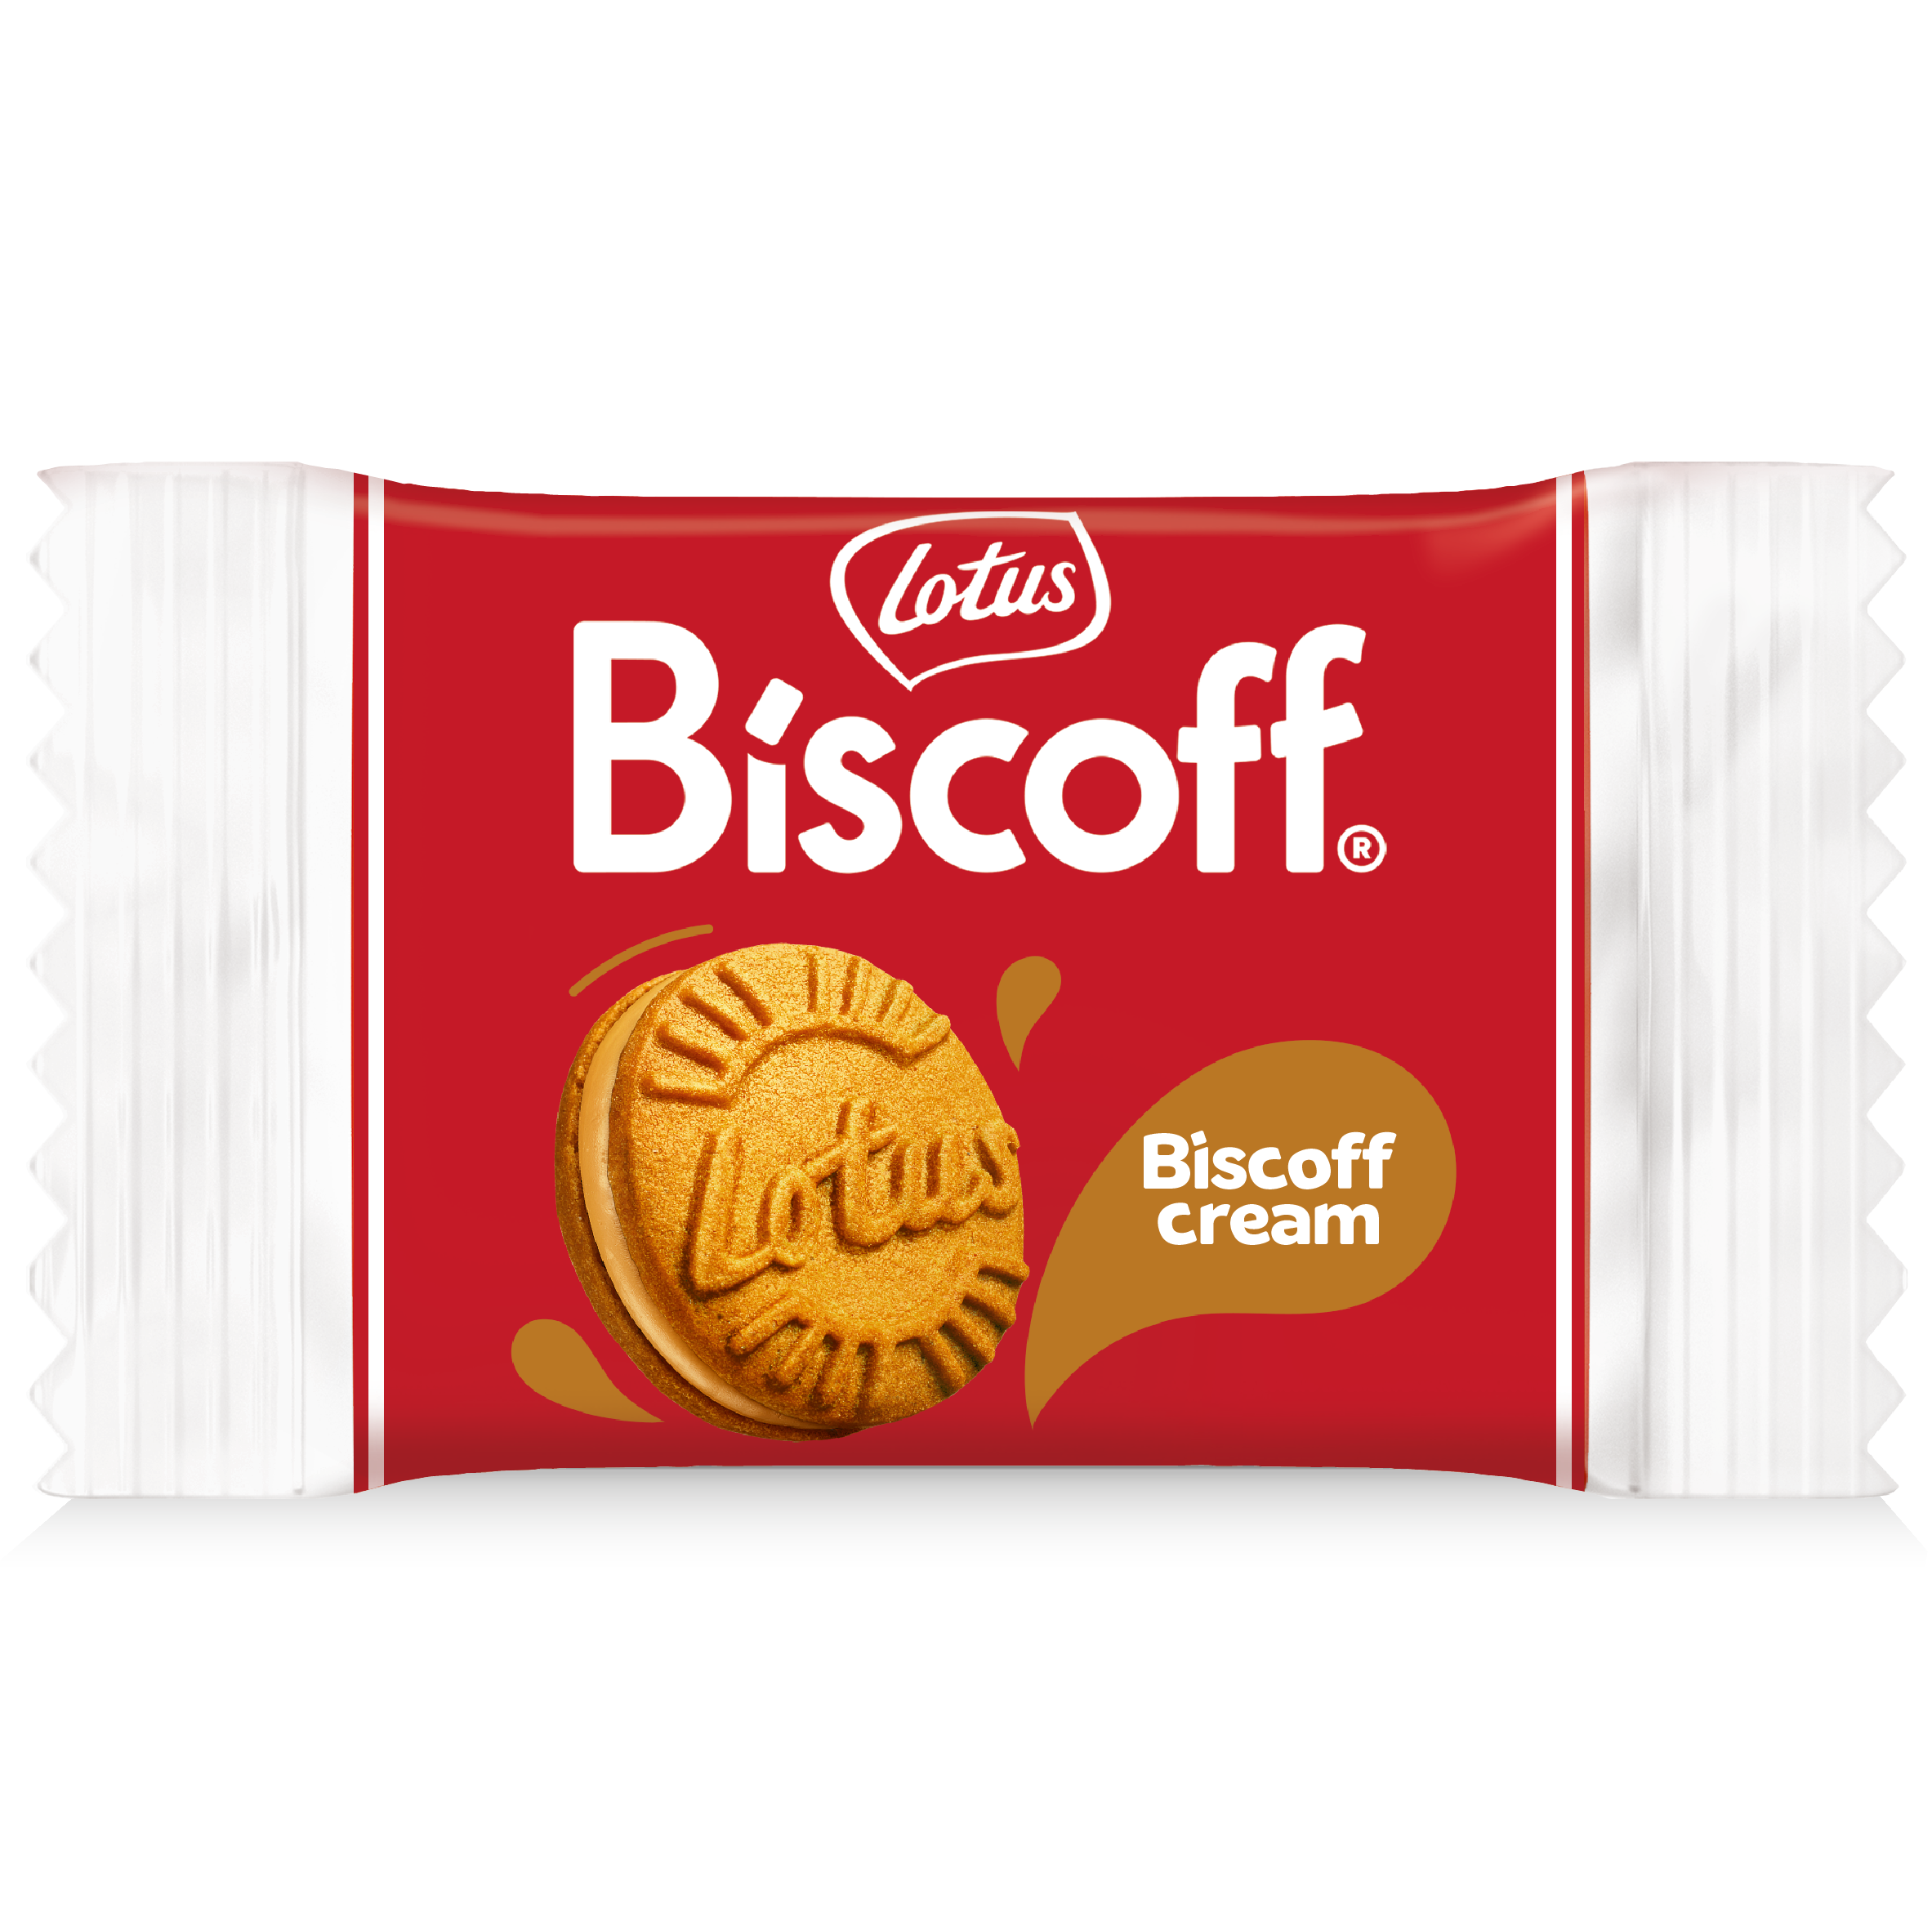 Lotus Biscoff Sandwich Biscuit Assortment - 120 Individually Wrapped P